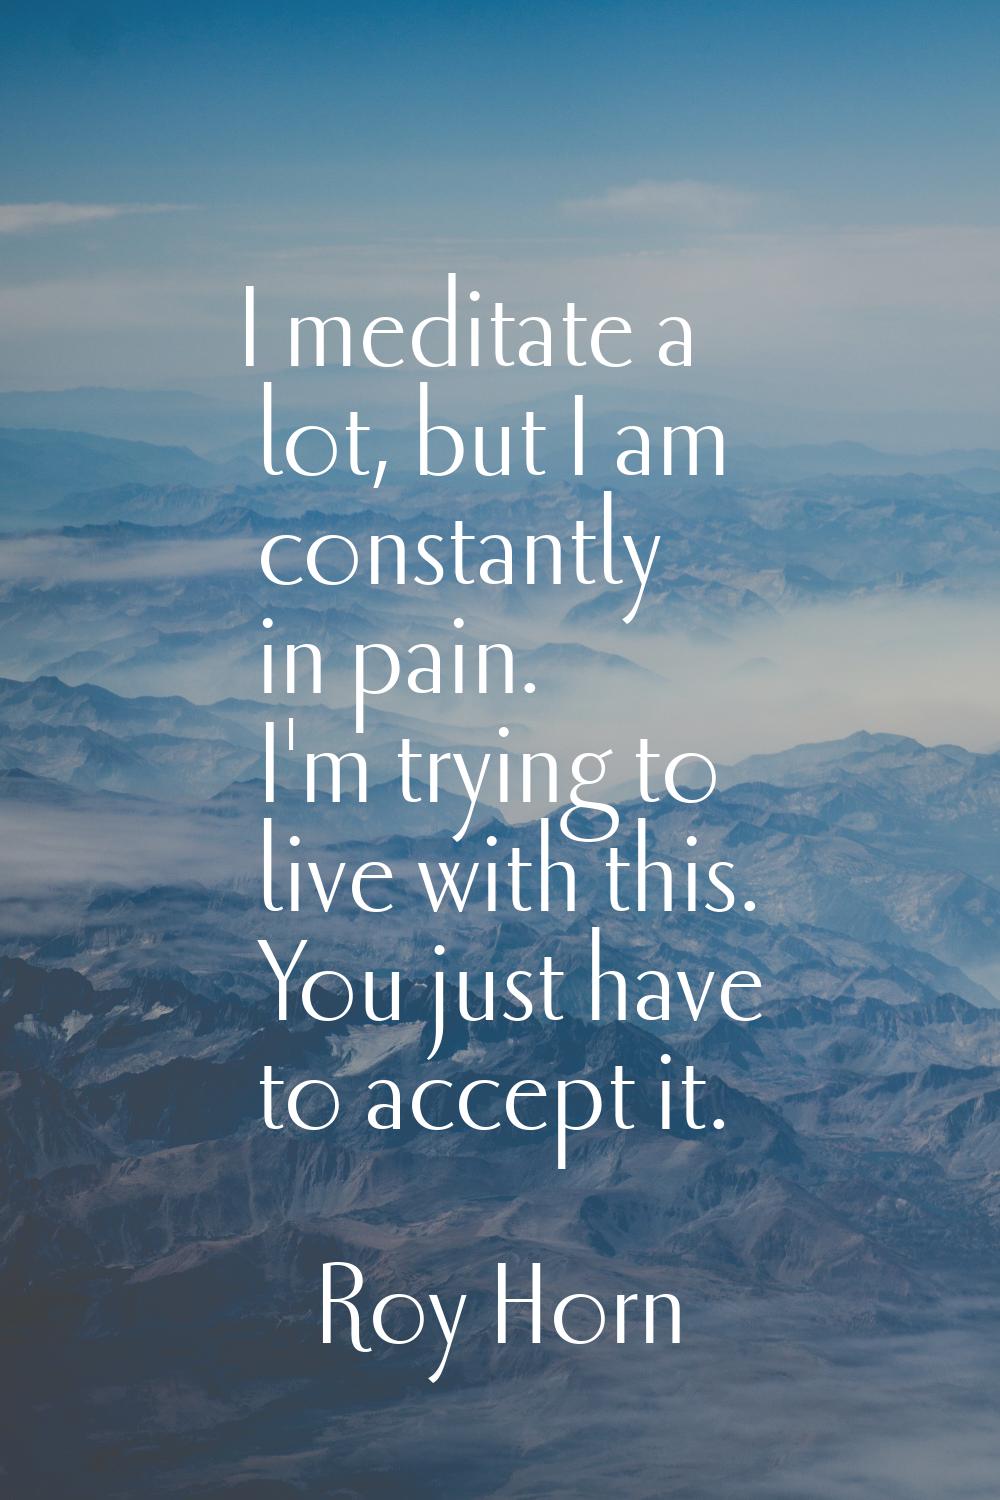 I meditate a lot, but I am constantly in pain. I'm trying to live with this. You just have to accep